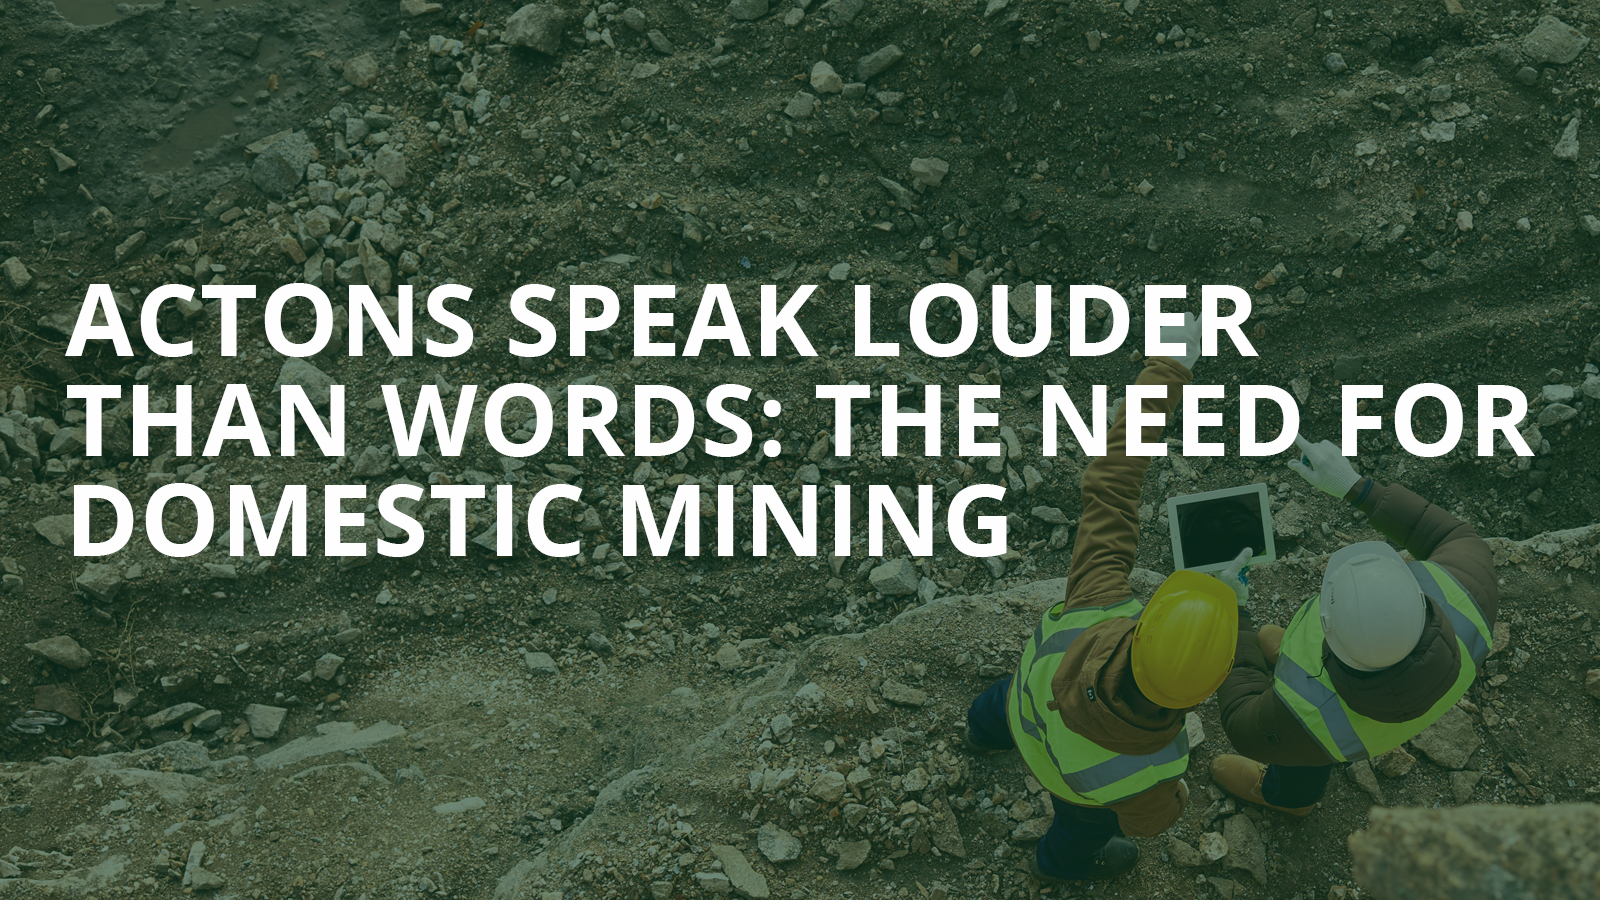 BRANDED: Actions Speak Louder Than Words: The Need for Domestic Mining